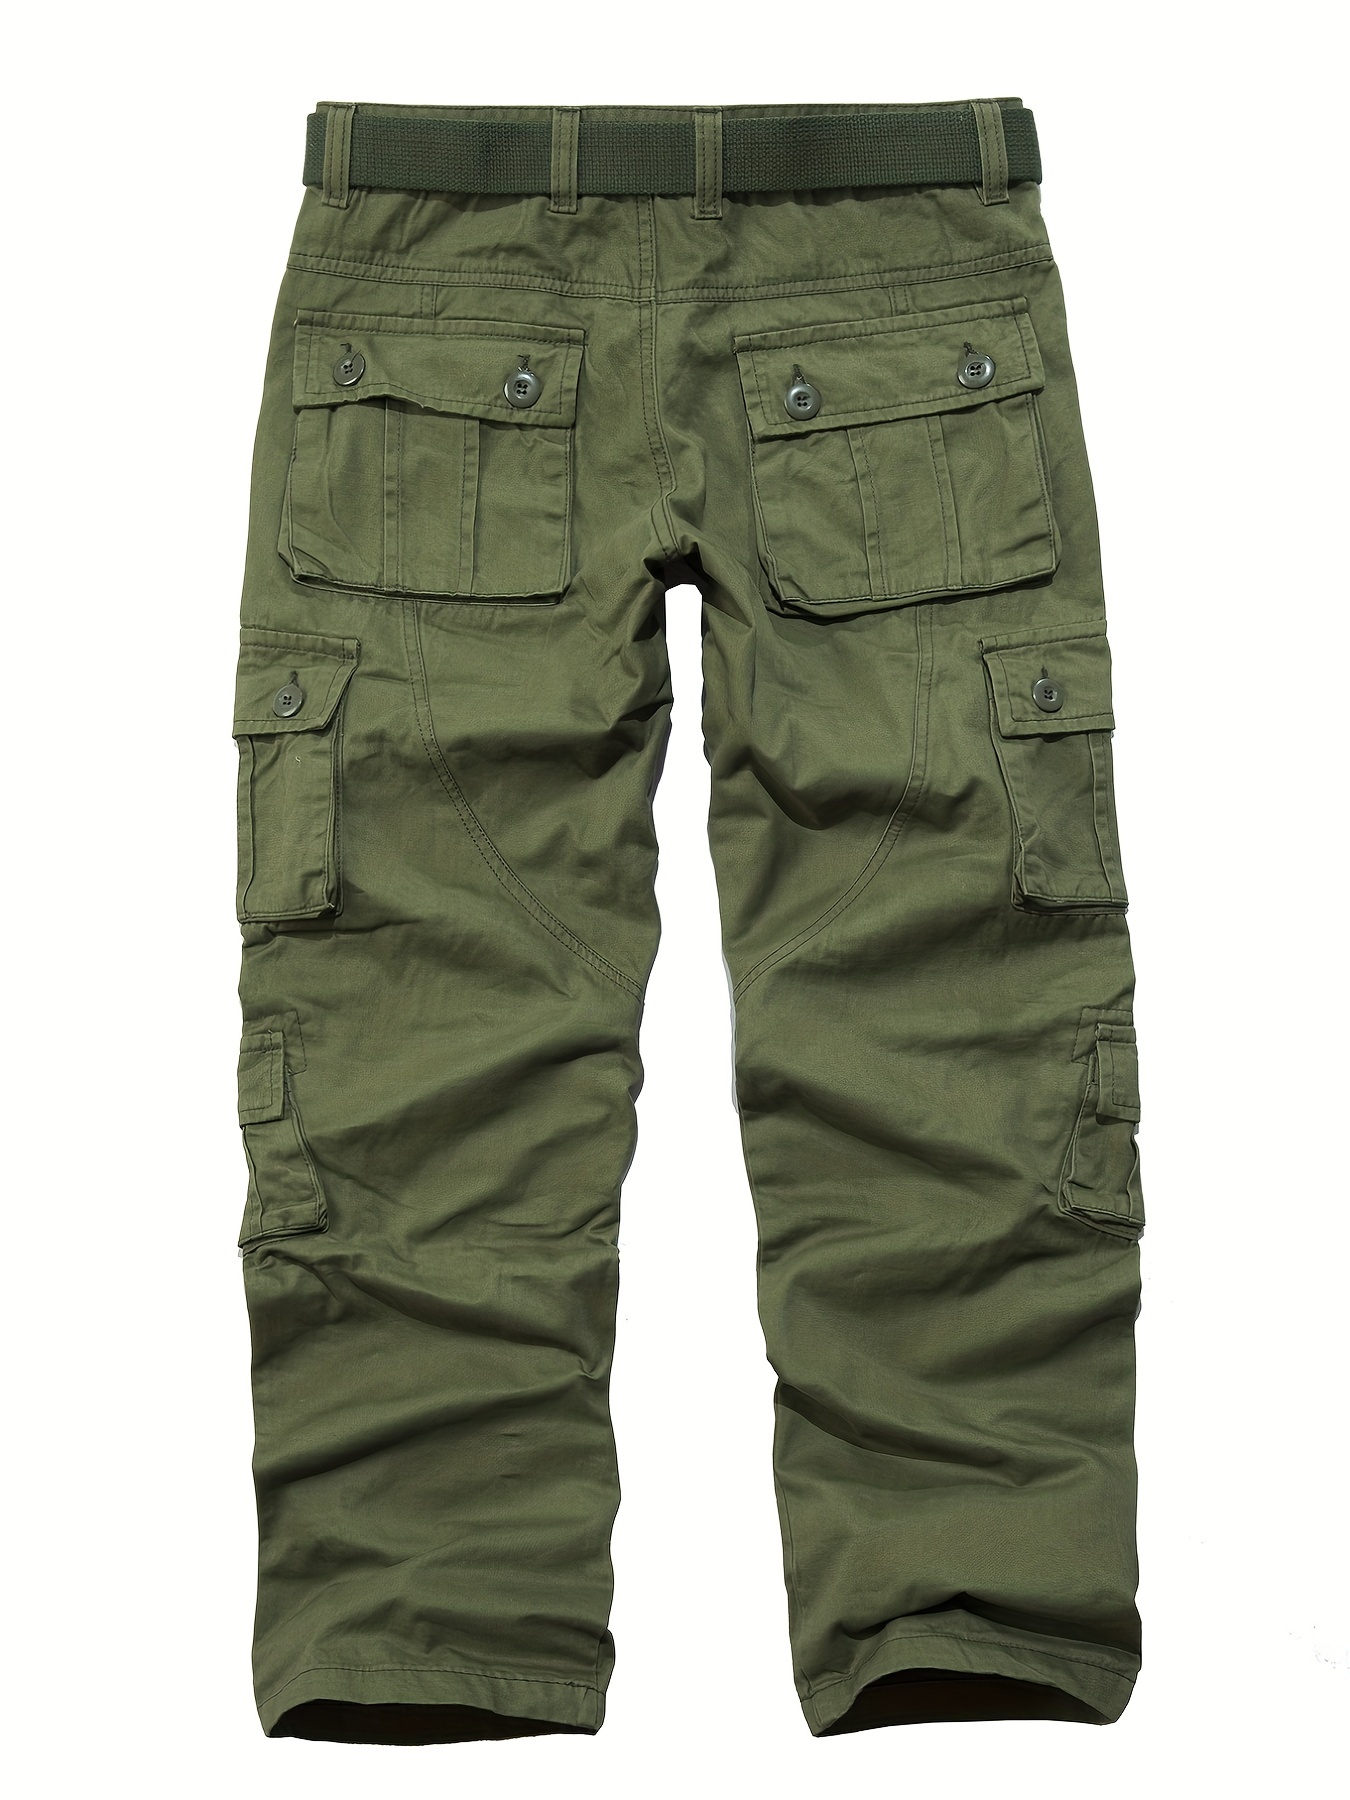 New Tactical Cargo Pants Men Military Pants Cotton Many Pockets Man Casual  Baggy Trousers Streetwear Straight Pantalones size 44 Color Khaki